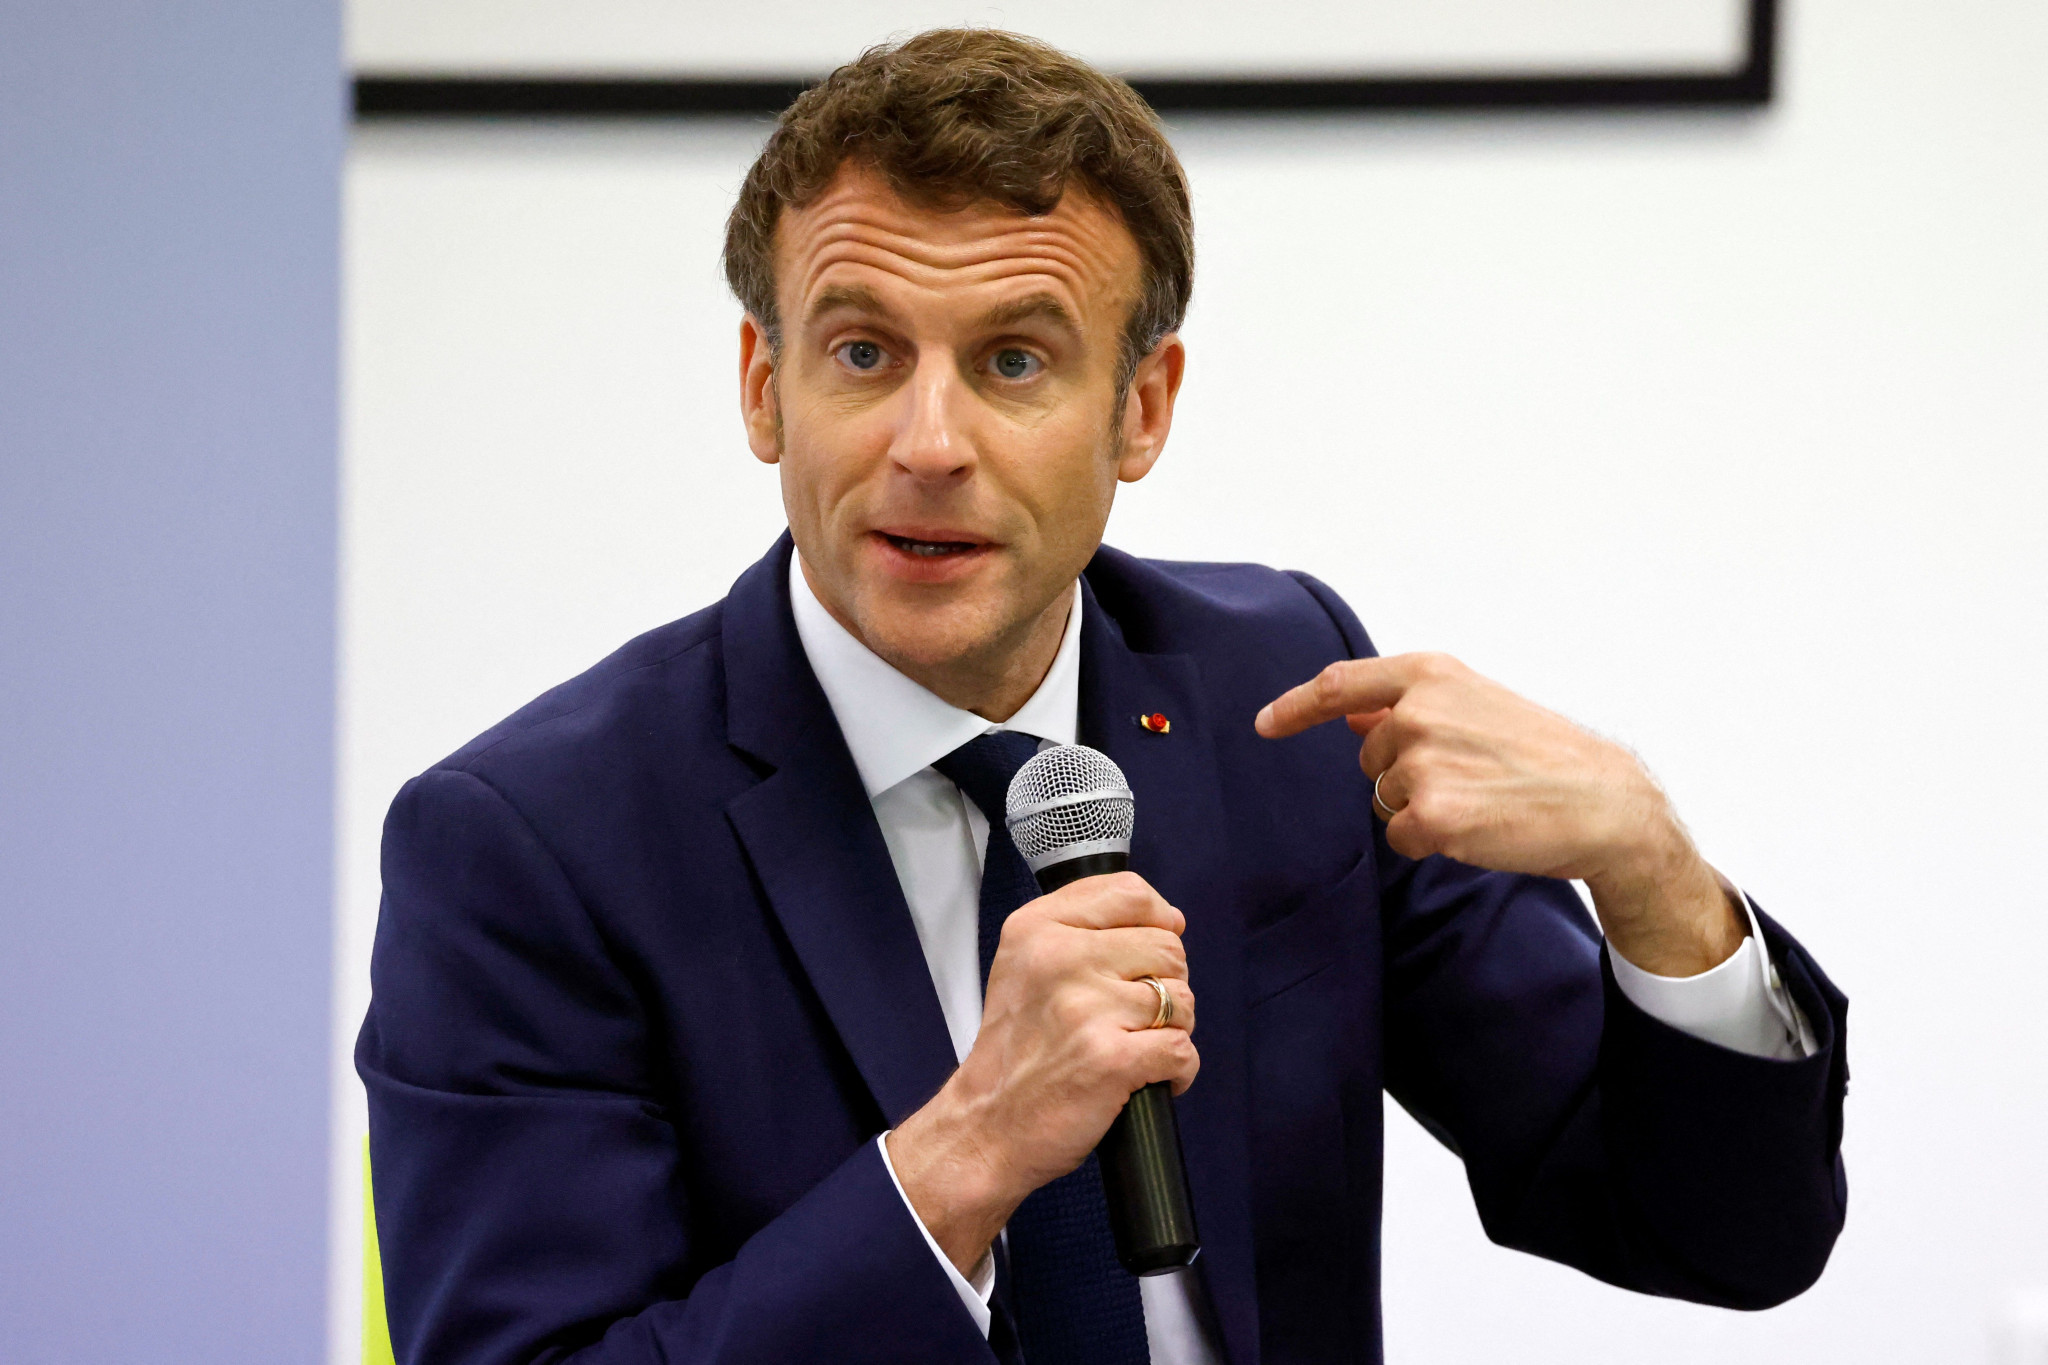 The CNOSF has urged the public to vote for incumbent Emmanuel Macron in the French Presidential election run-off ©Getty Images